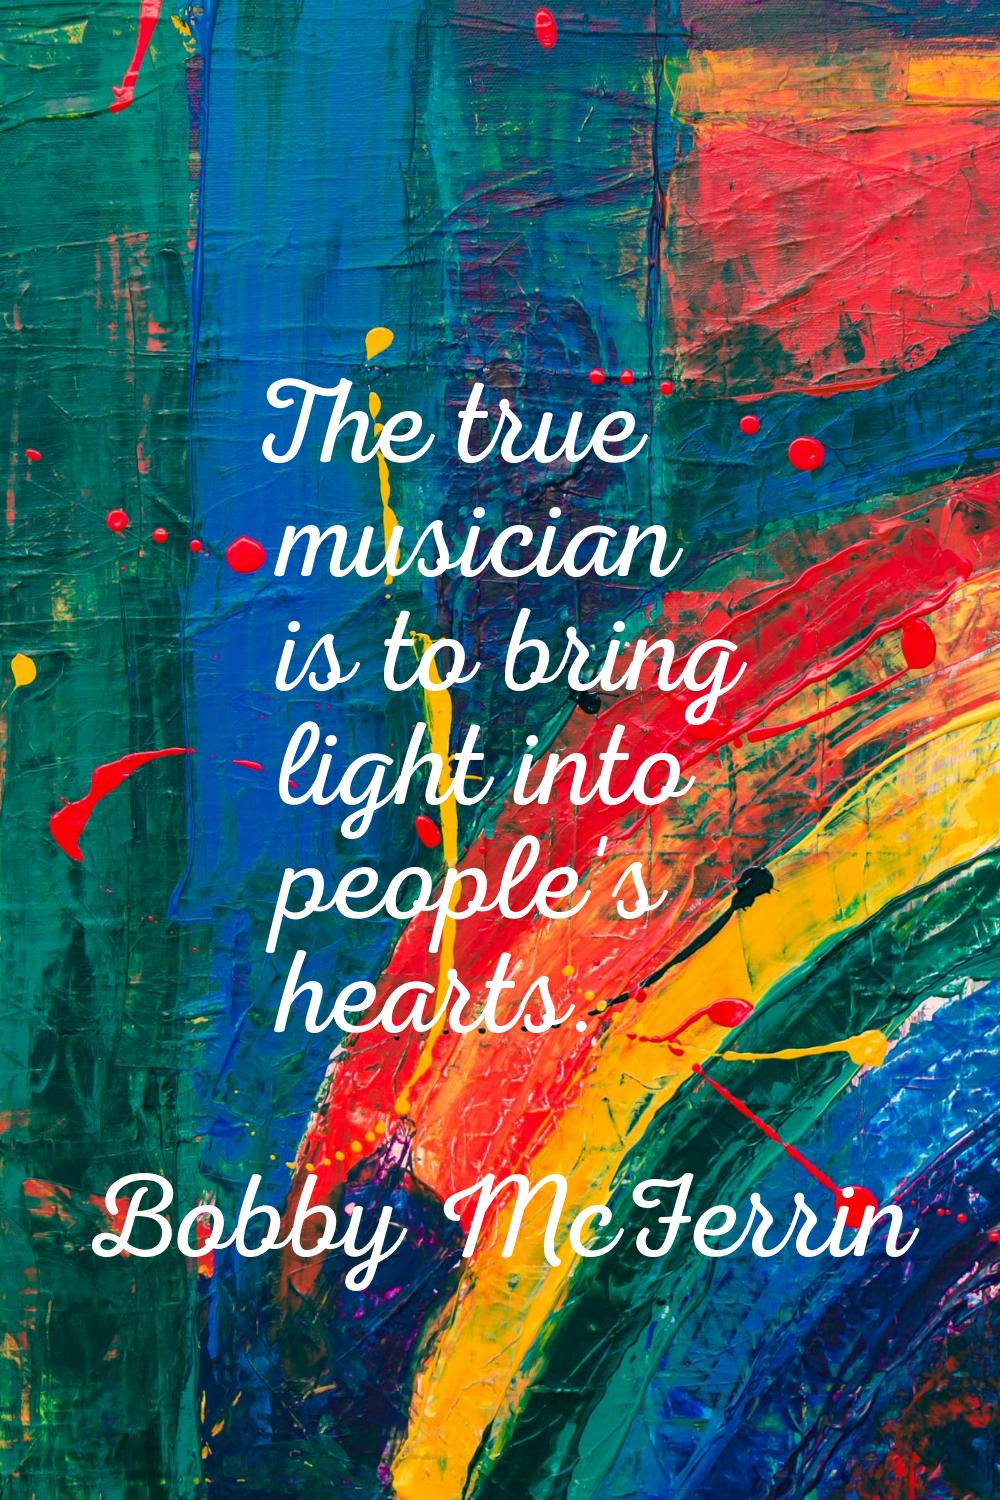 The true musician is to bring light into people's hearts.